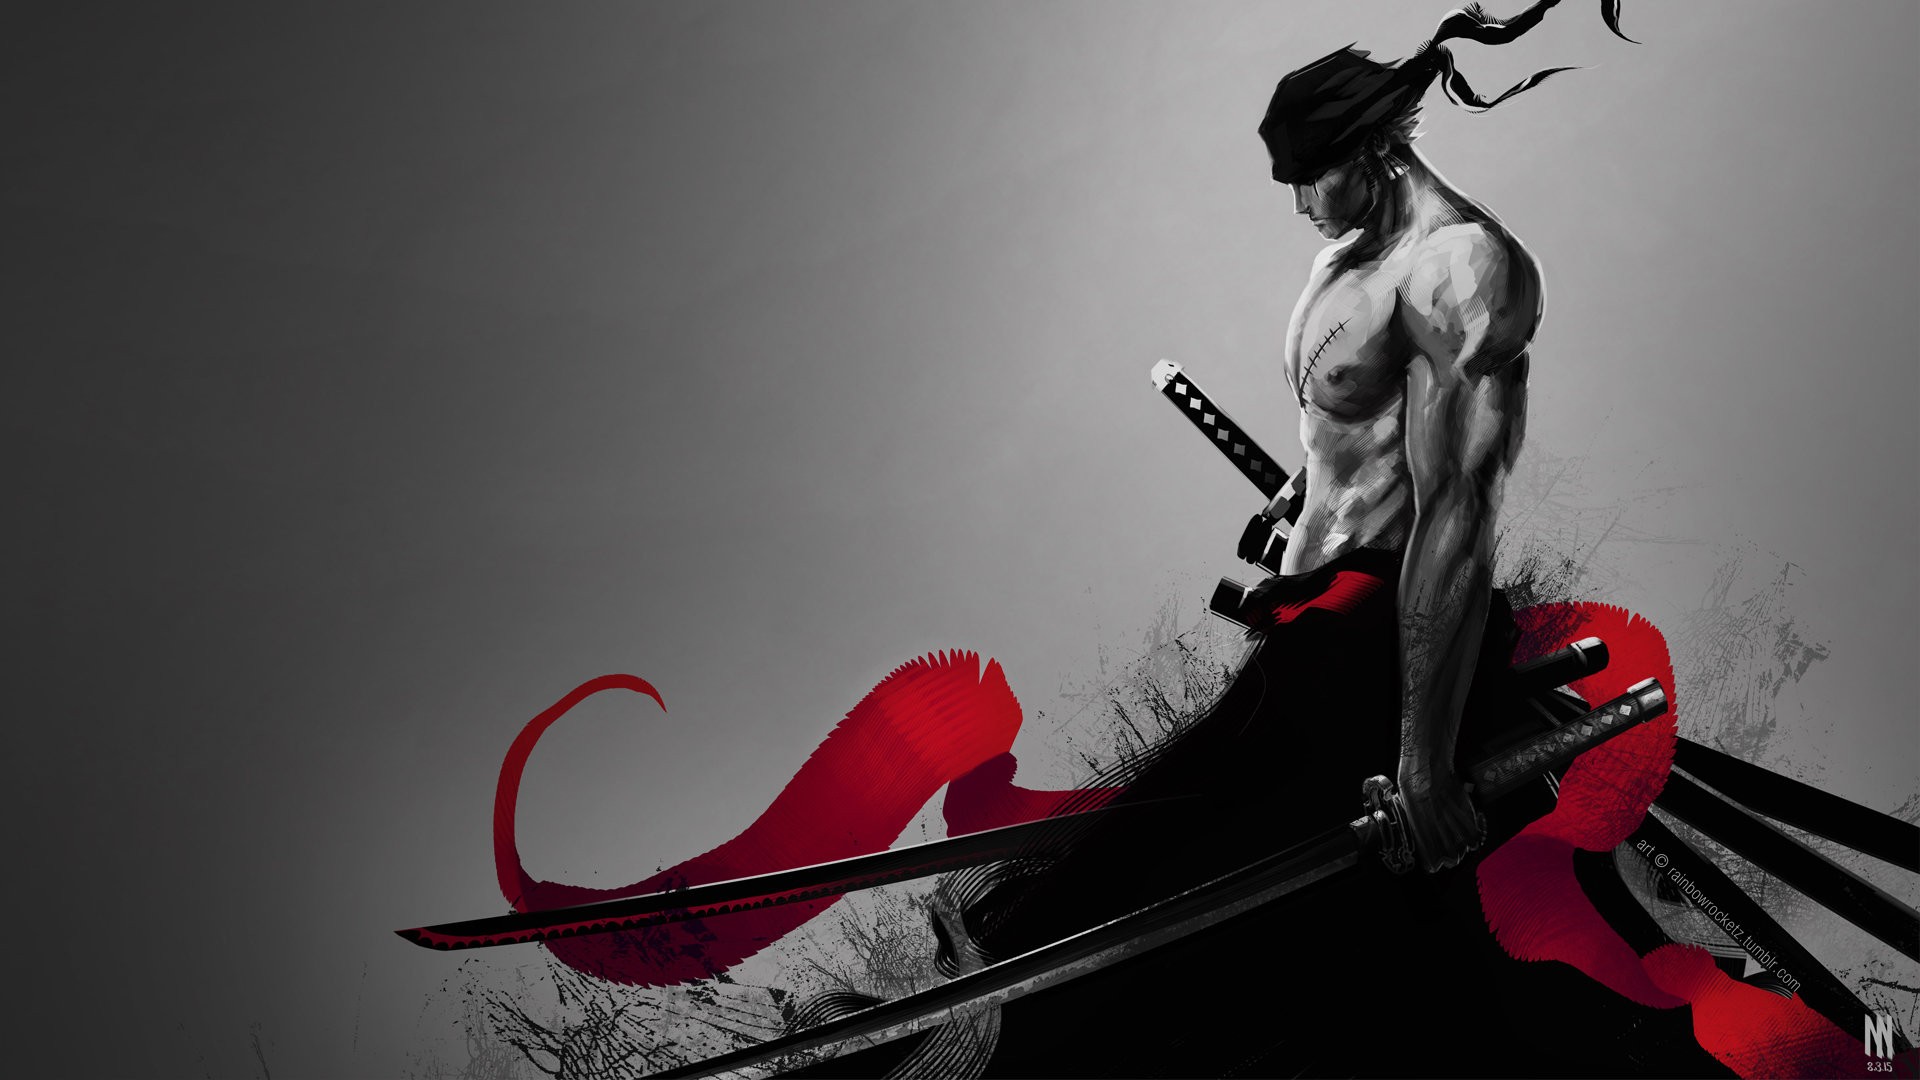 Desktop Wallpaper Roronoa Zoro Of One Piece Anime Wallpaper, Hd Image,  Picture, Background, Og2s8i